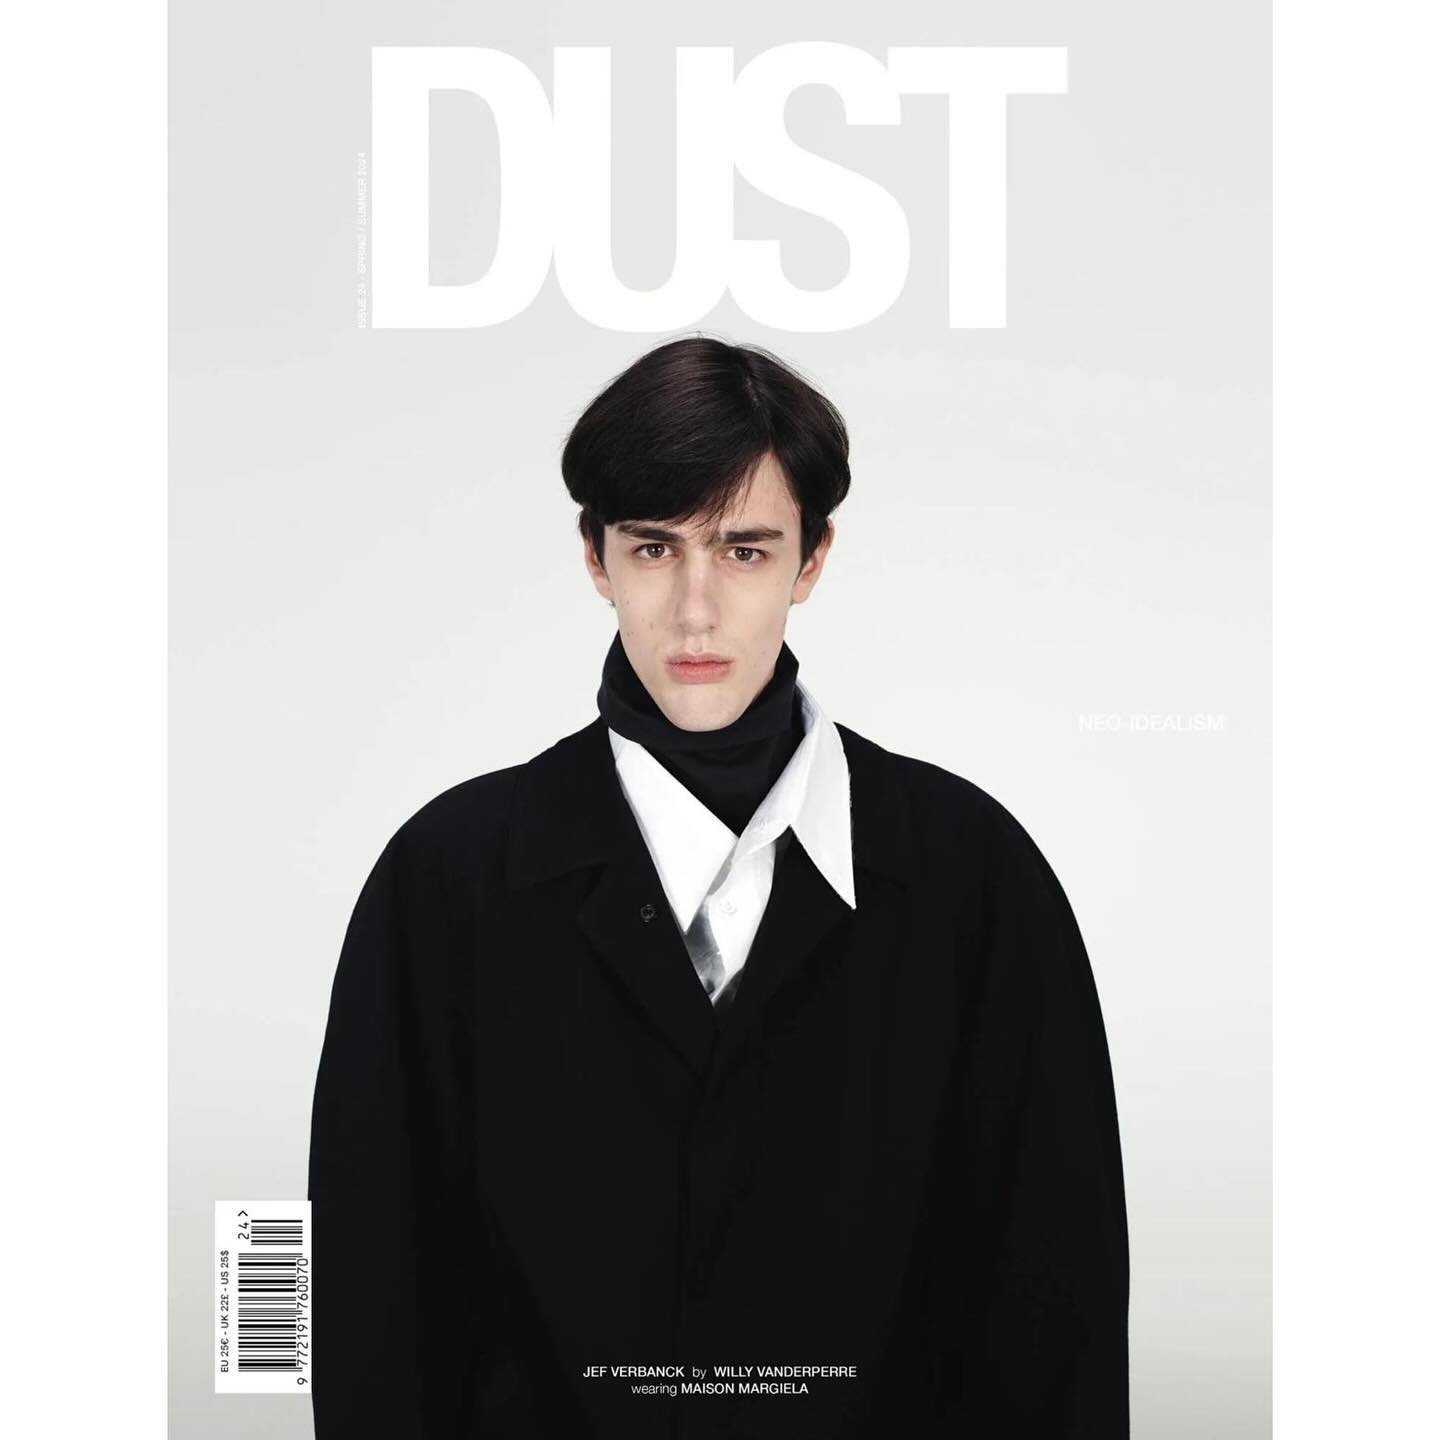 Jef V (@jef_verbanck ) on the cover of Dust Magazine. Photography by Willy Vanderperre, styling by Olivier Rizzo, hair by Anthony Turner, make-up by Lynsey Alexander, casting by Samuel Ellis for DM Casting.